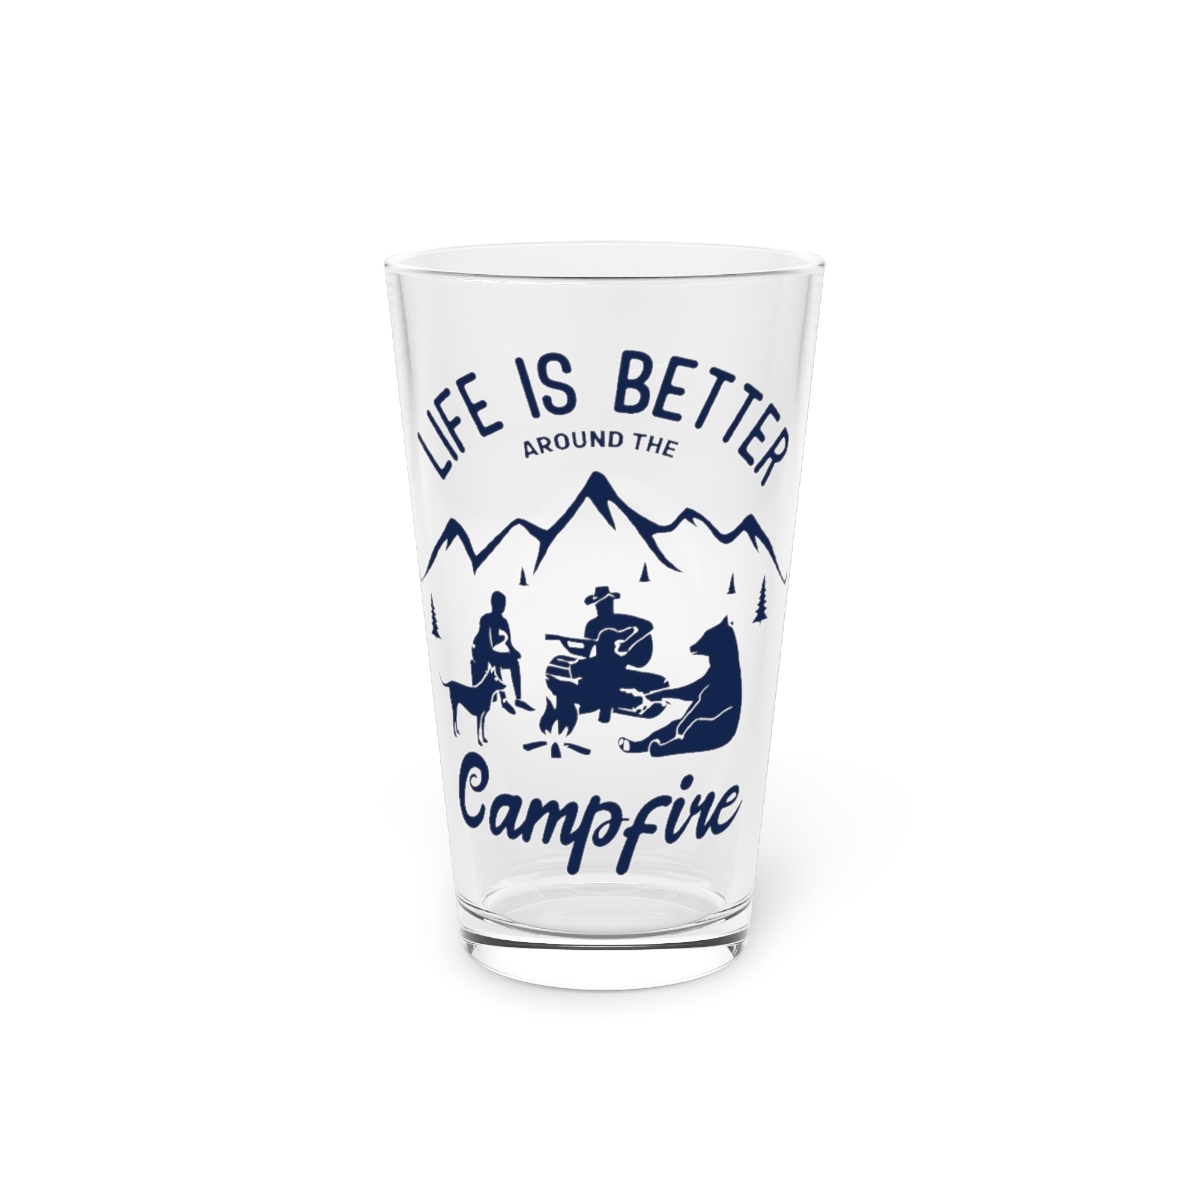 Primary image for Personalized 16oz Custom Pint Glass with Camping Design for Camping Enthusiasts